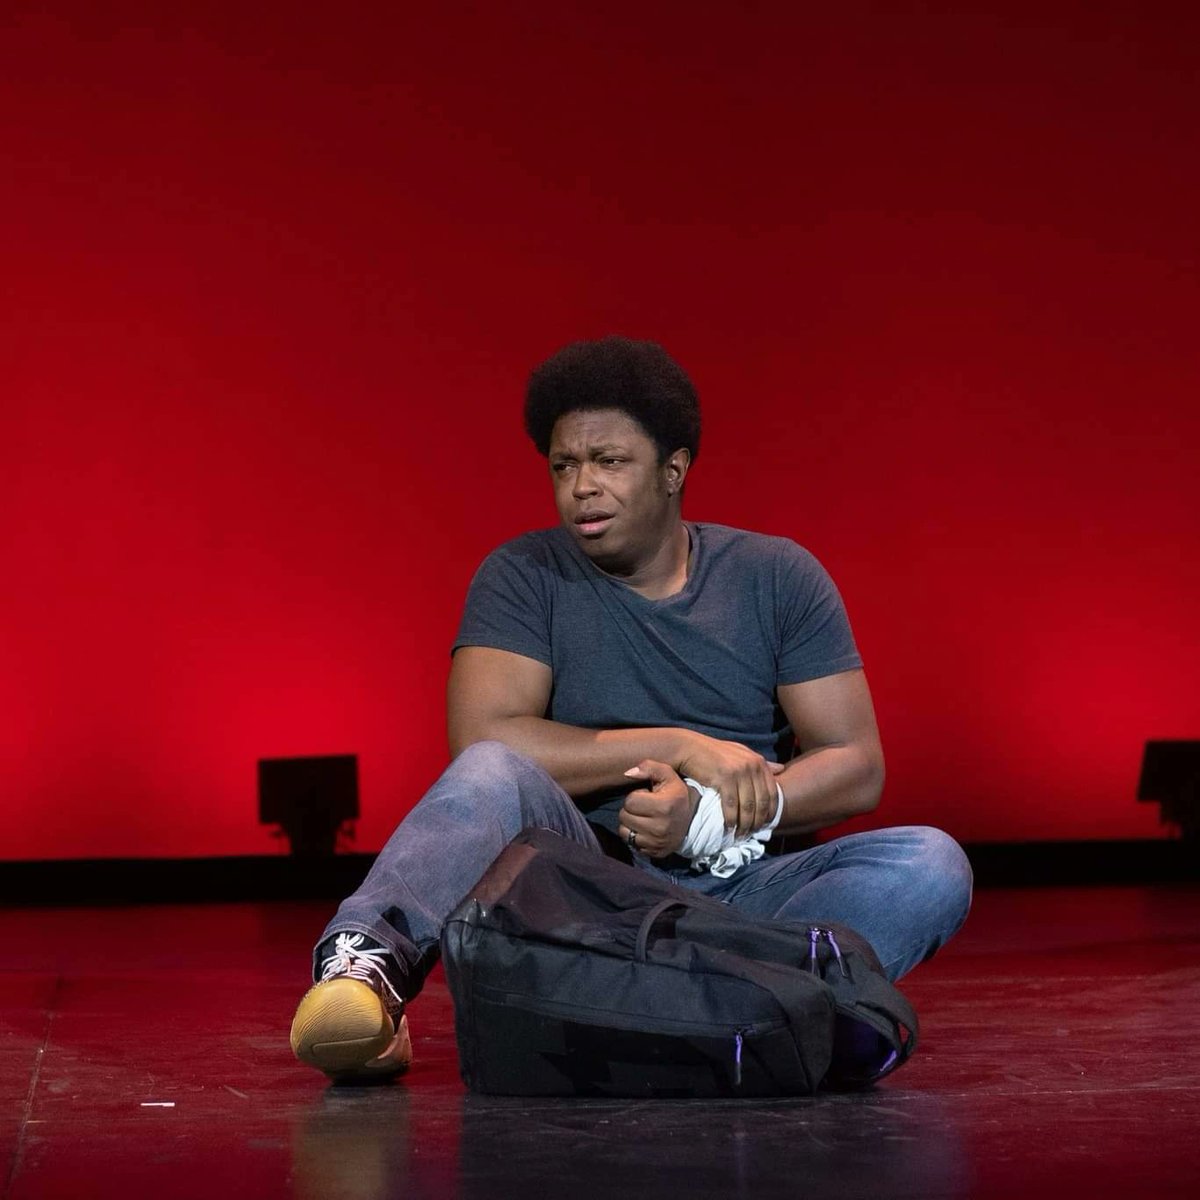 It was my honor to get to tell an amazing story in @ForwardTheater 's 'Out in this world' monologue festival. I am lucky to get to do this. Several people described this piece as 'intense' and 'powerful'. A thanks to everyone involved and everyone who attended.